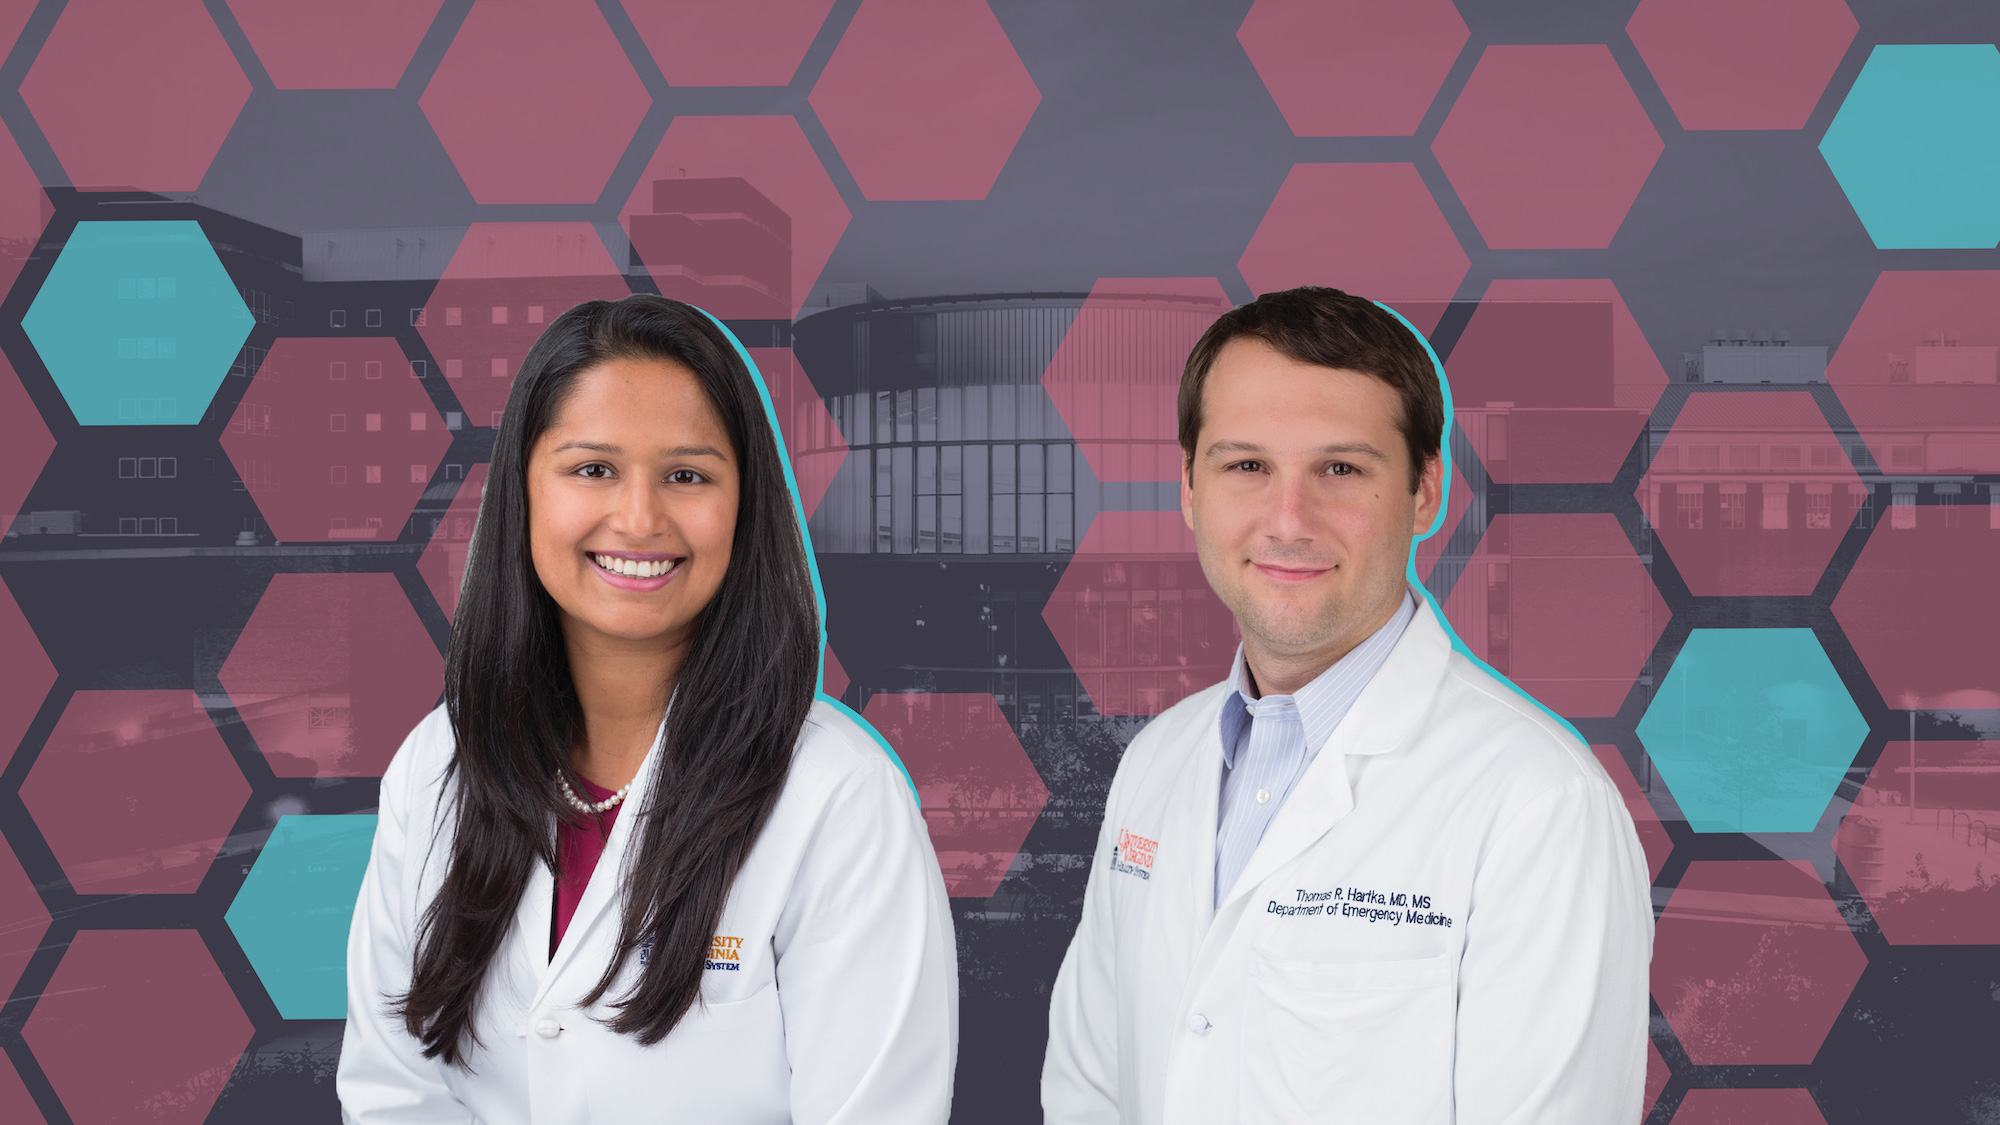 Drs. Syed and Hartka with hexagonal background